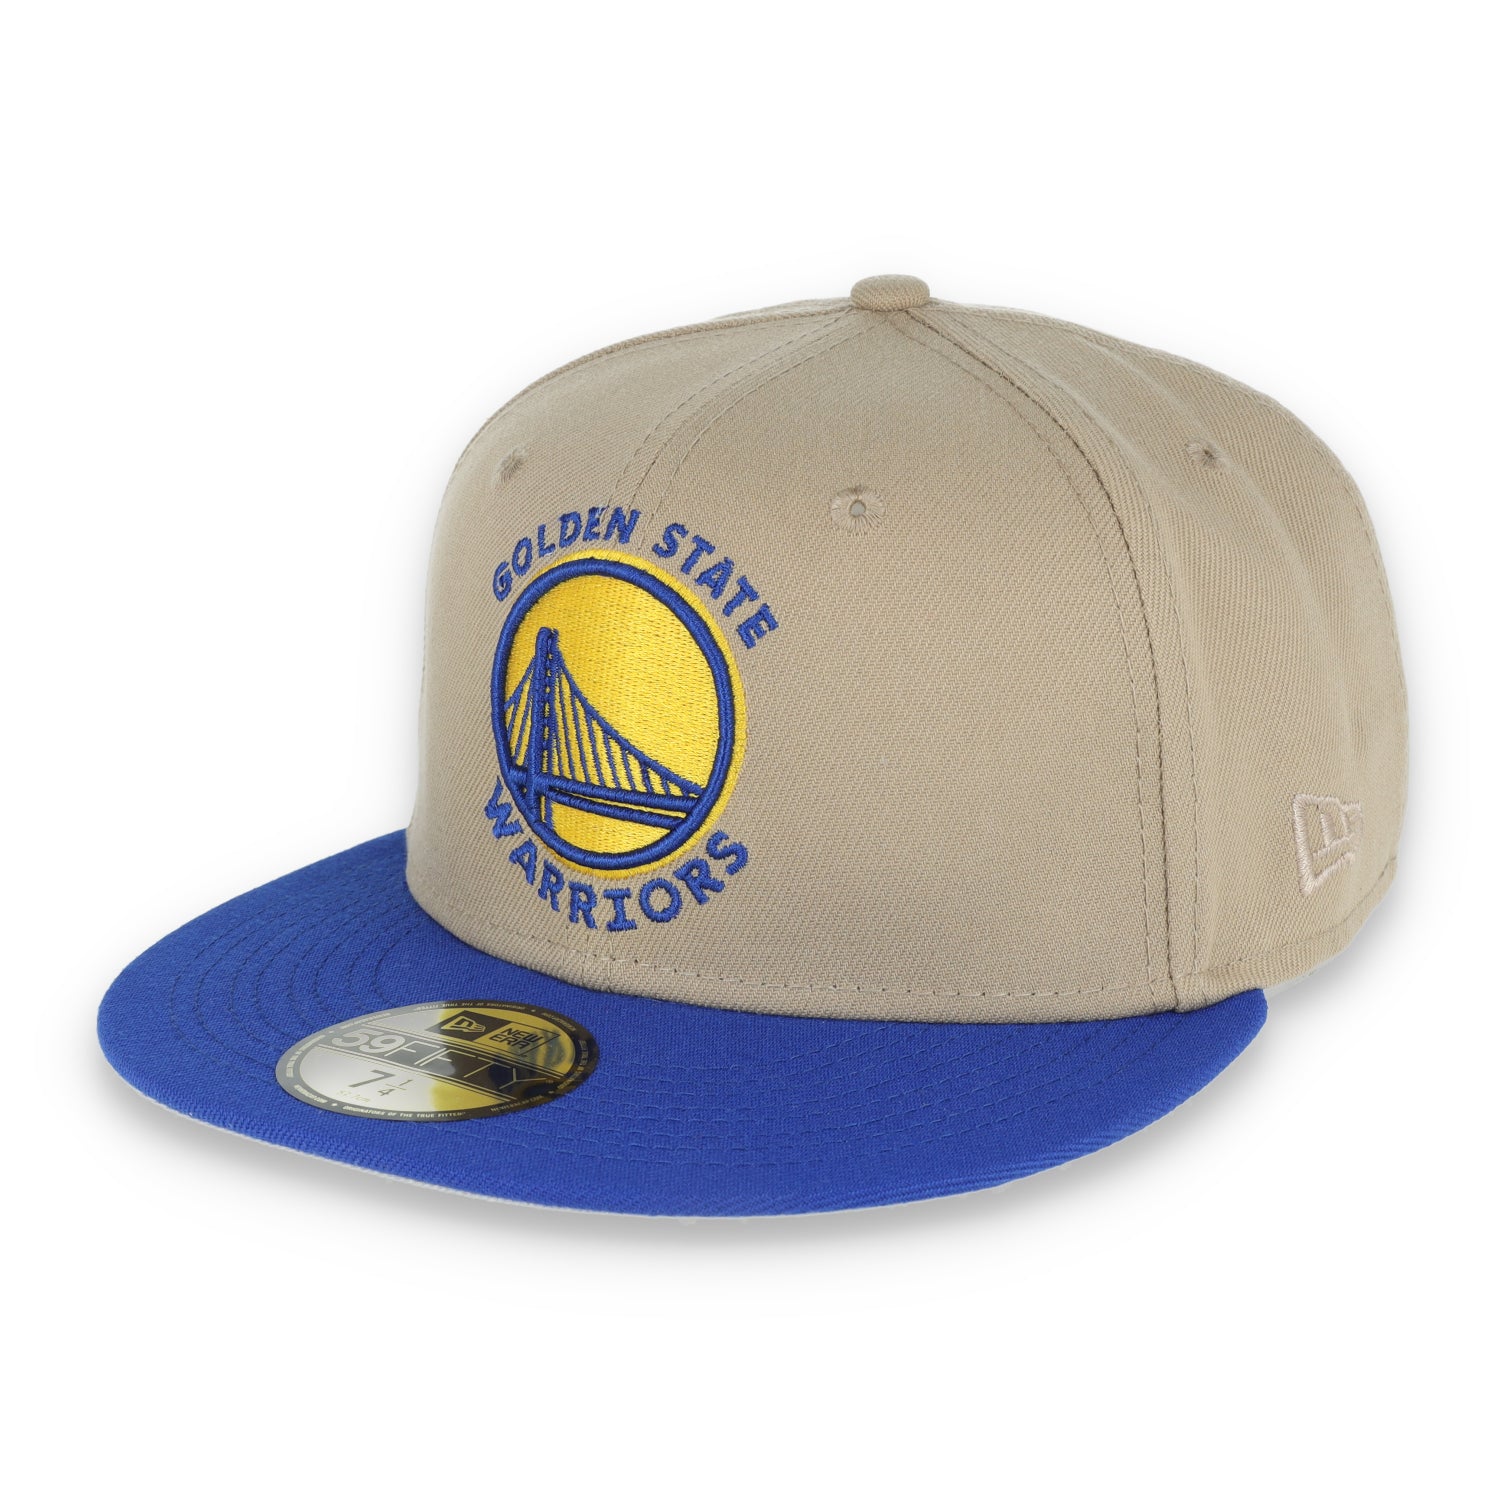 New Era Golden State Warriors 6X Champions Side Patch 59FIFTY Fitted Hat-Khaki